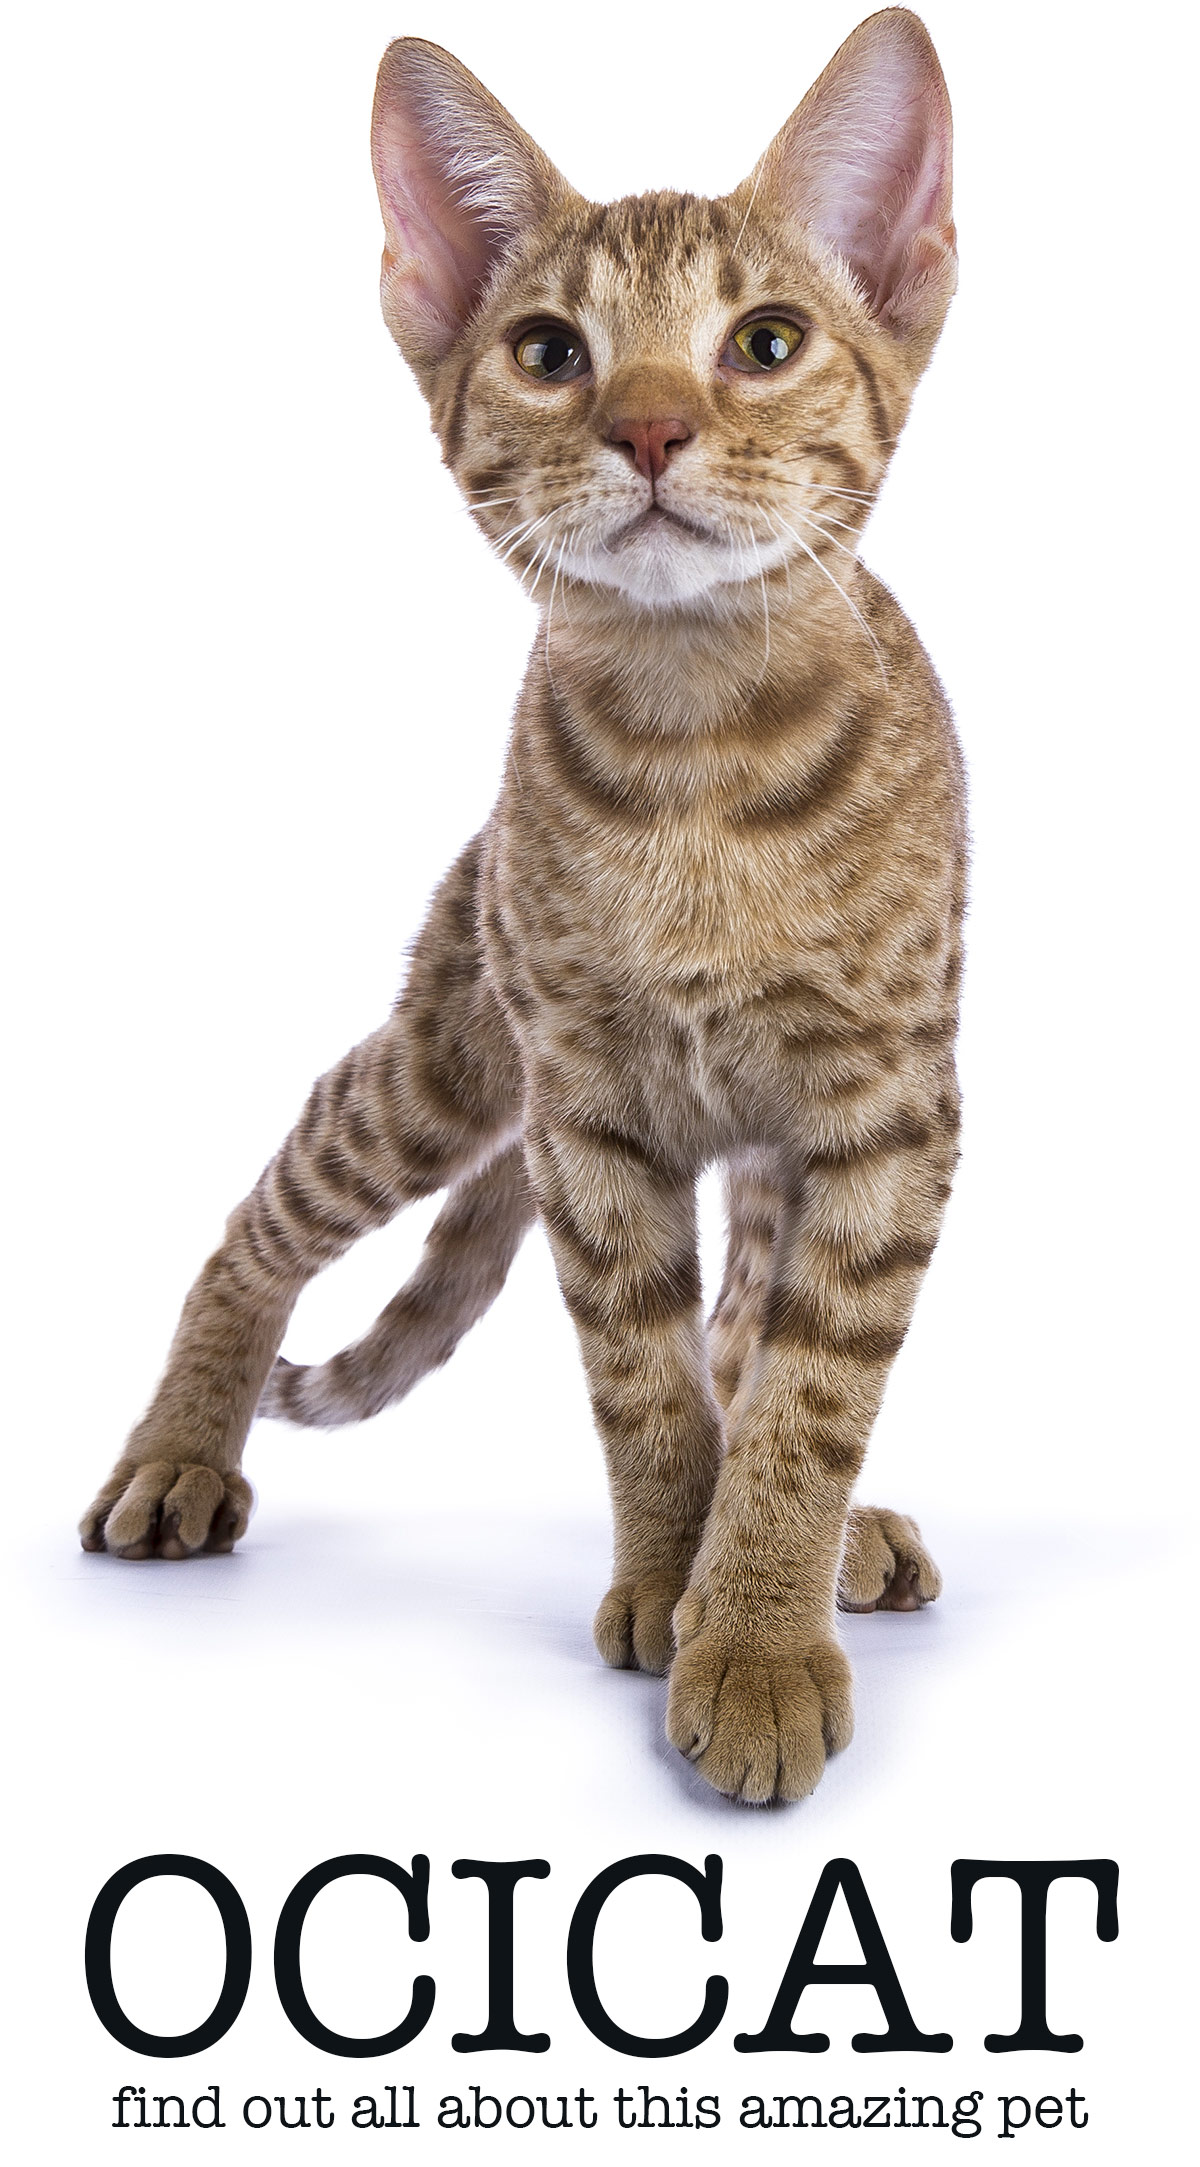 Domestic Cats That Look Like Leopards - 12 Super Wild Looking Breeds